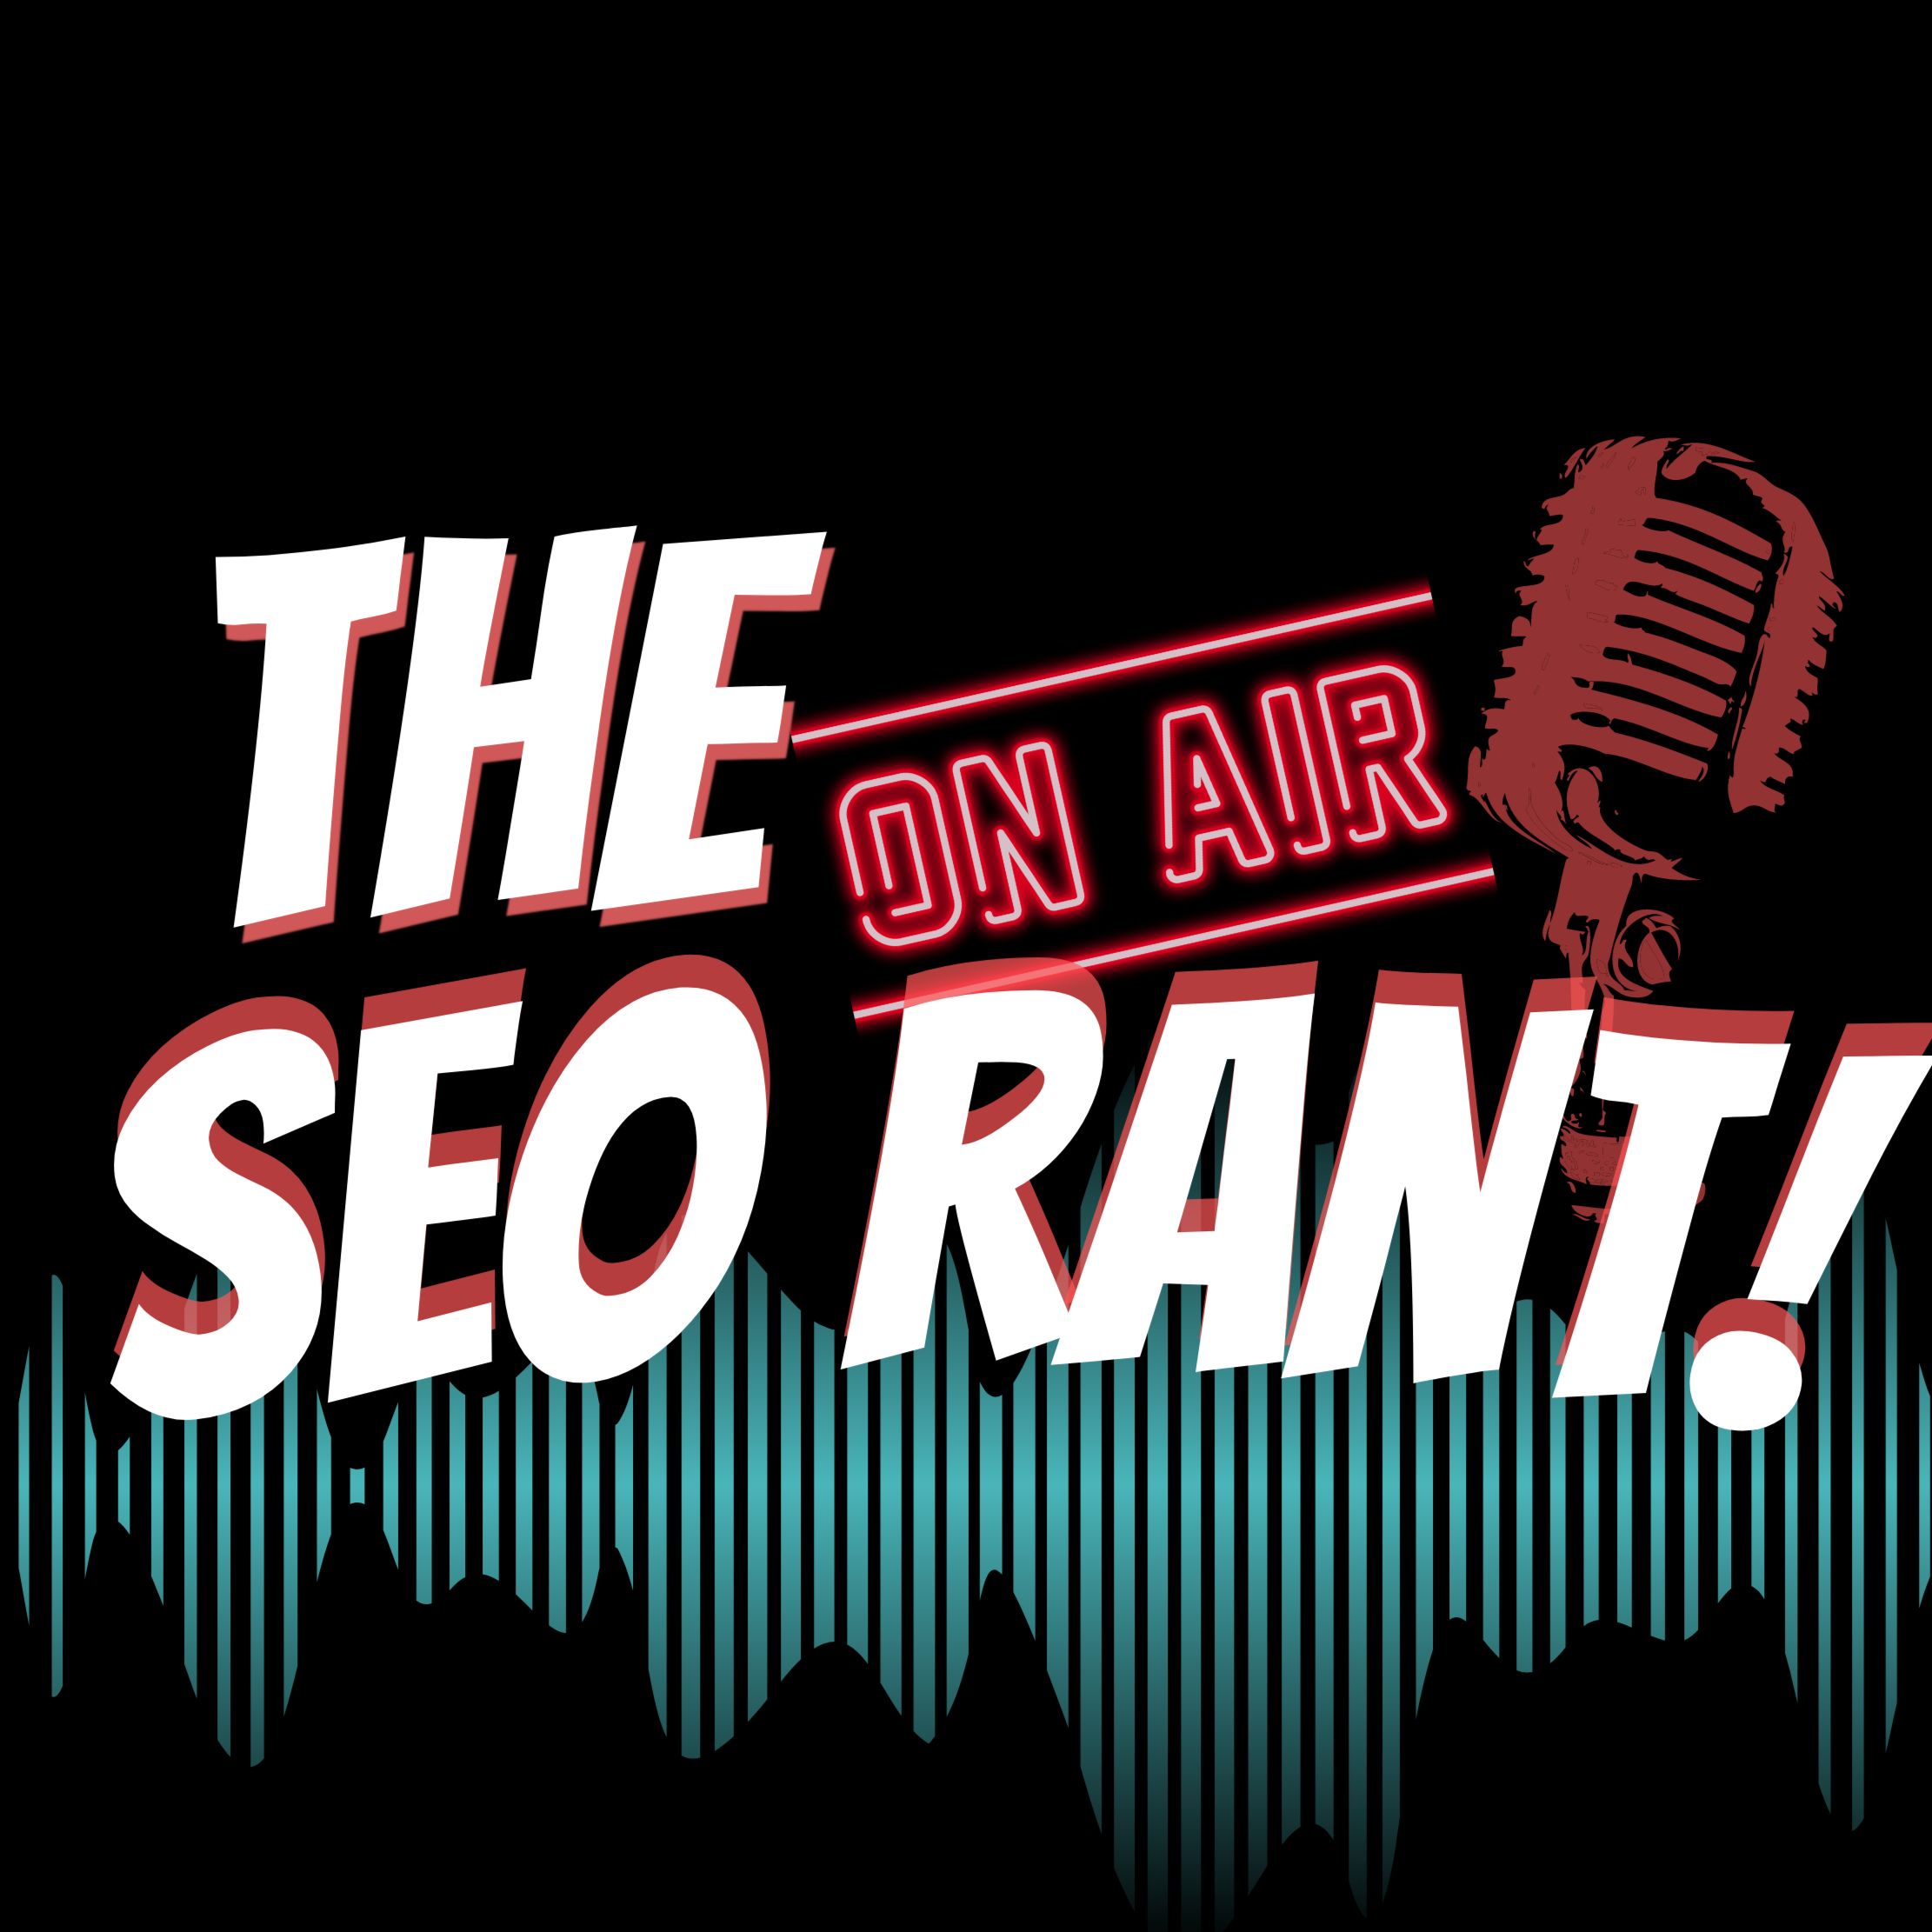 Why You Need to be Cautious About AI Content [Episode #100] : When and where can you use AIwritten content It depends One thing is certain you should be cautious Ashwin Balakrishnan joins the SEO Rant to discuss the downside of overrelying on AI written content:  What AI lacks that makes it a terrible idea to use as a replacement for human content creators  Why making a business decision on a technology that is still emerging makes no sense Why time will show that going all in on AI was a mistake for brandsListen in as Ashwin and Mordy kvetch about AI